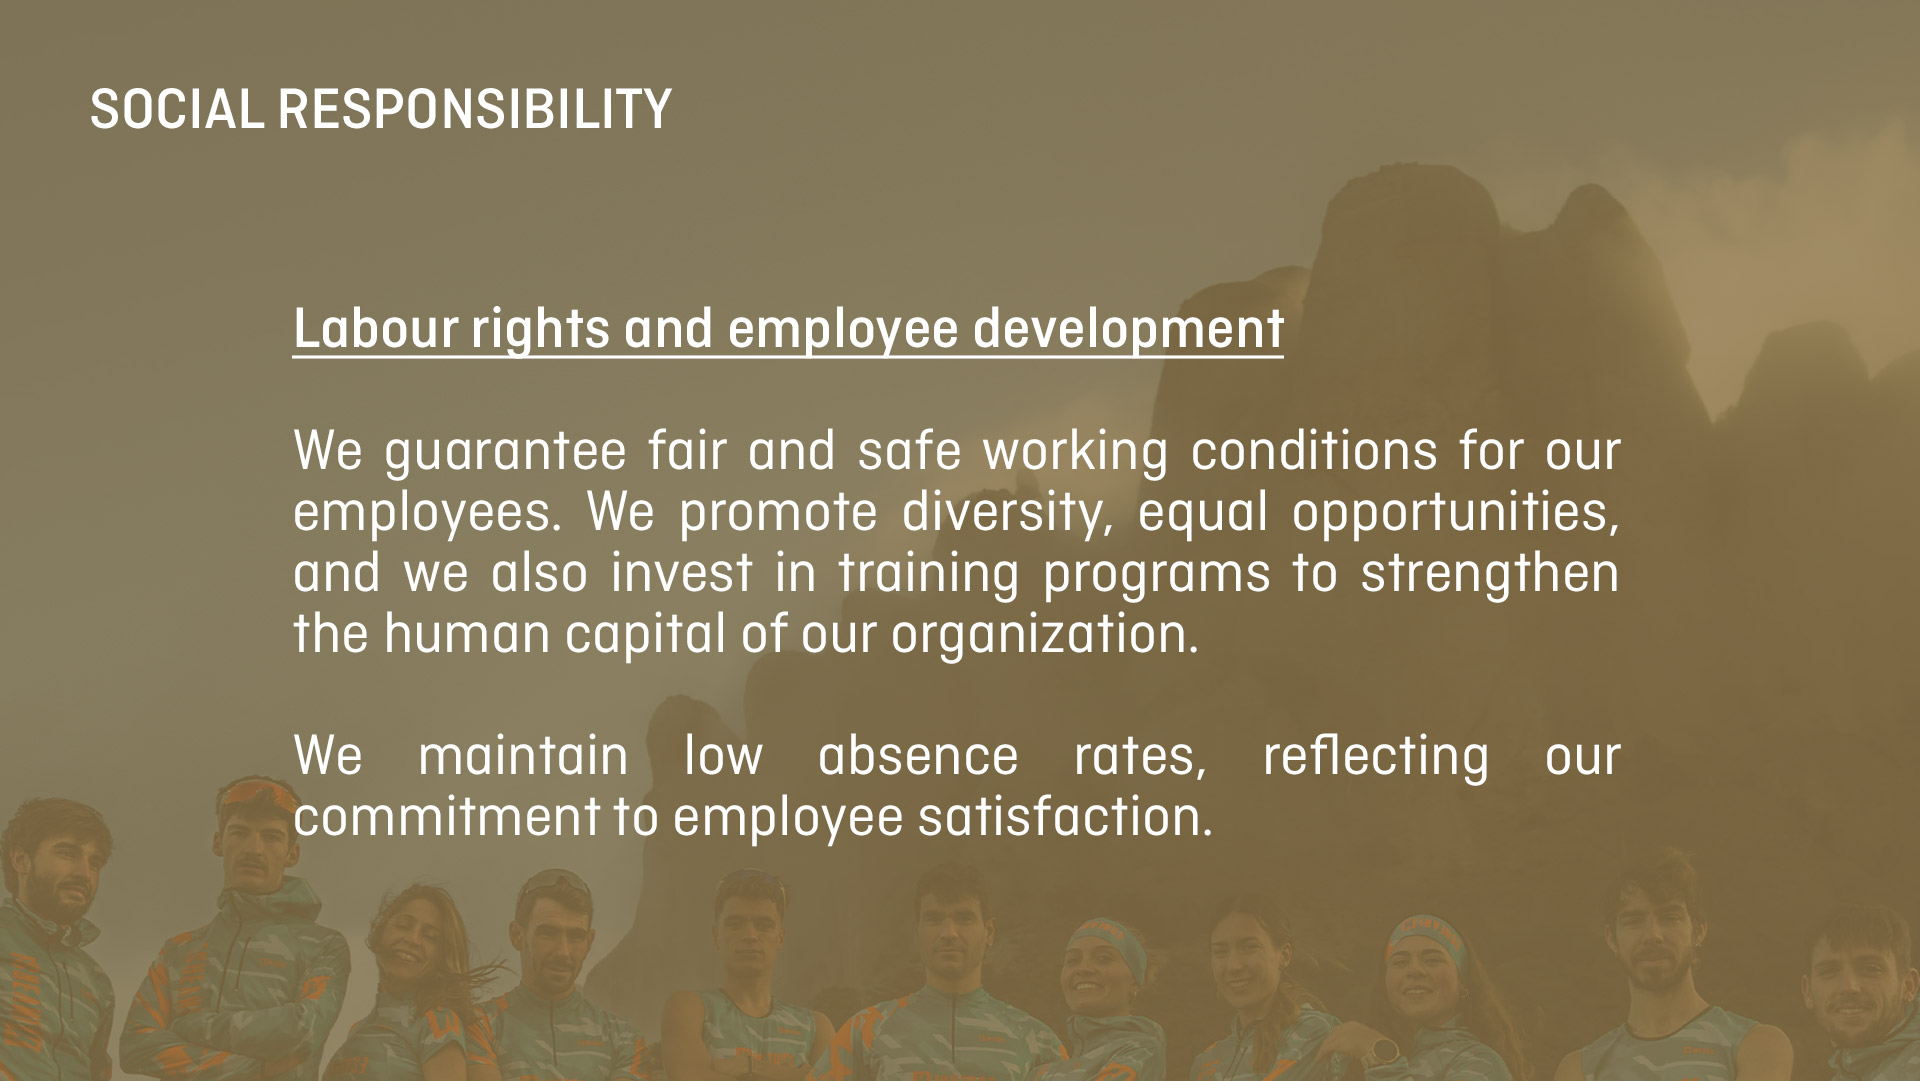 SOCIAL RISPONSABILITY. We promote diversity, equal opportunities, and we also invest in training programs to strengthen the human capital of our organization.